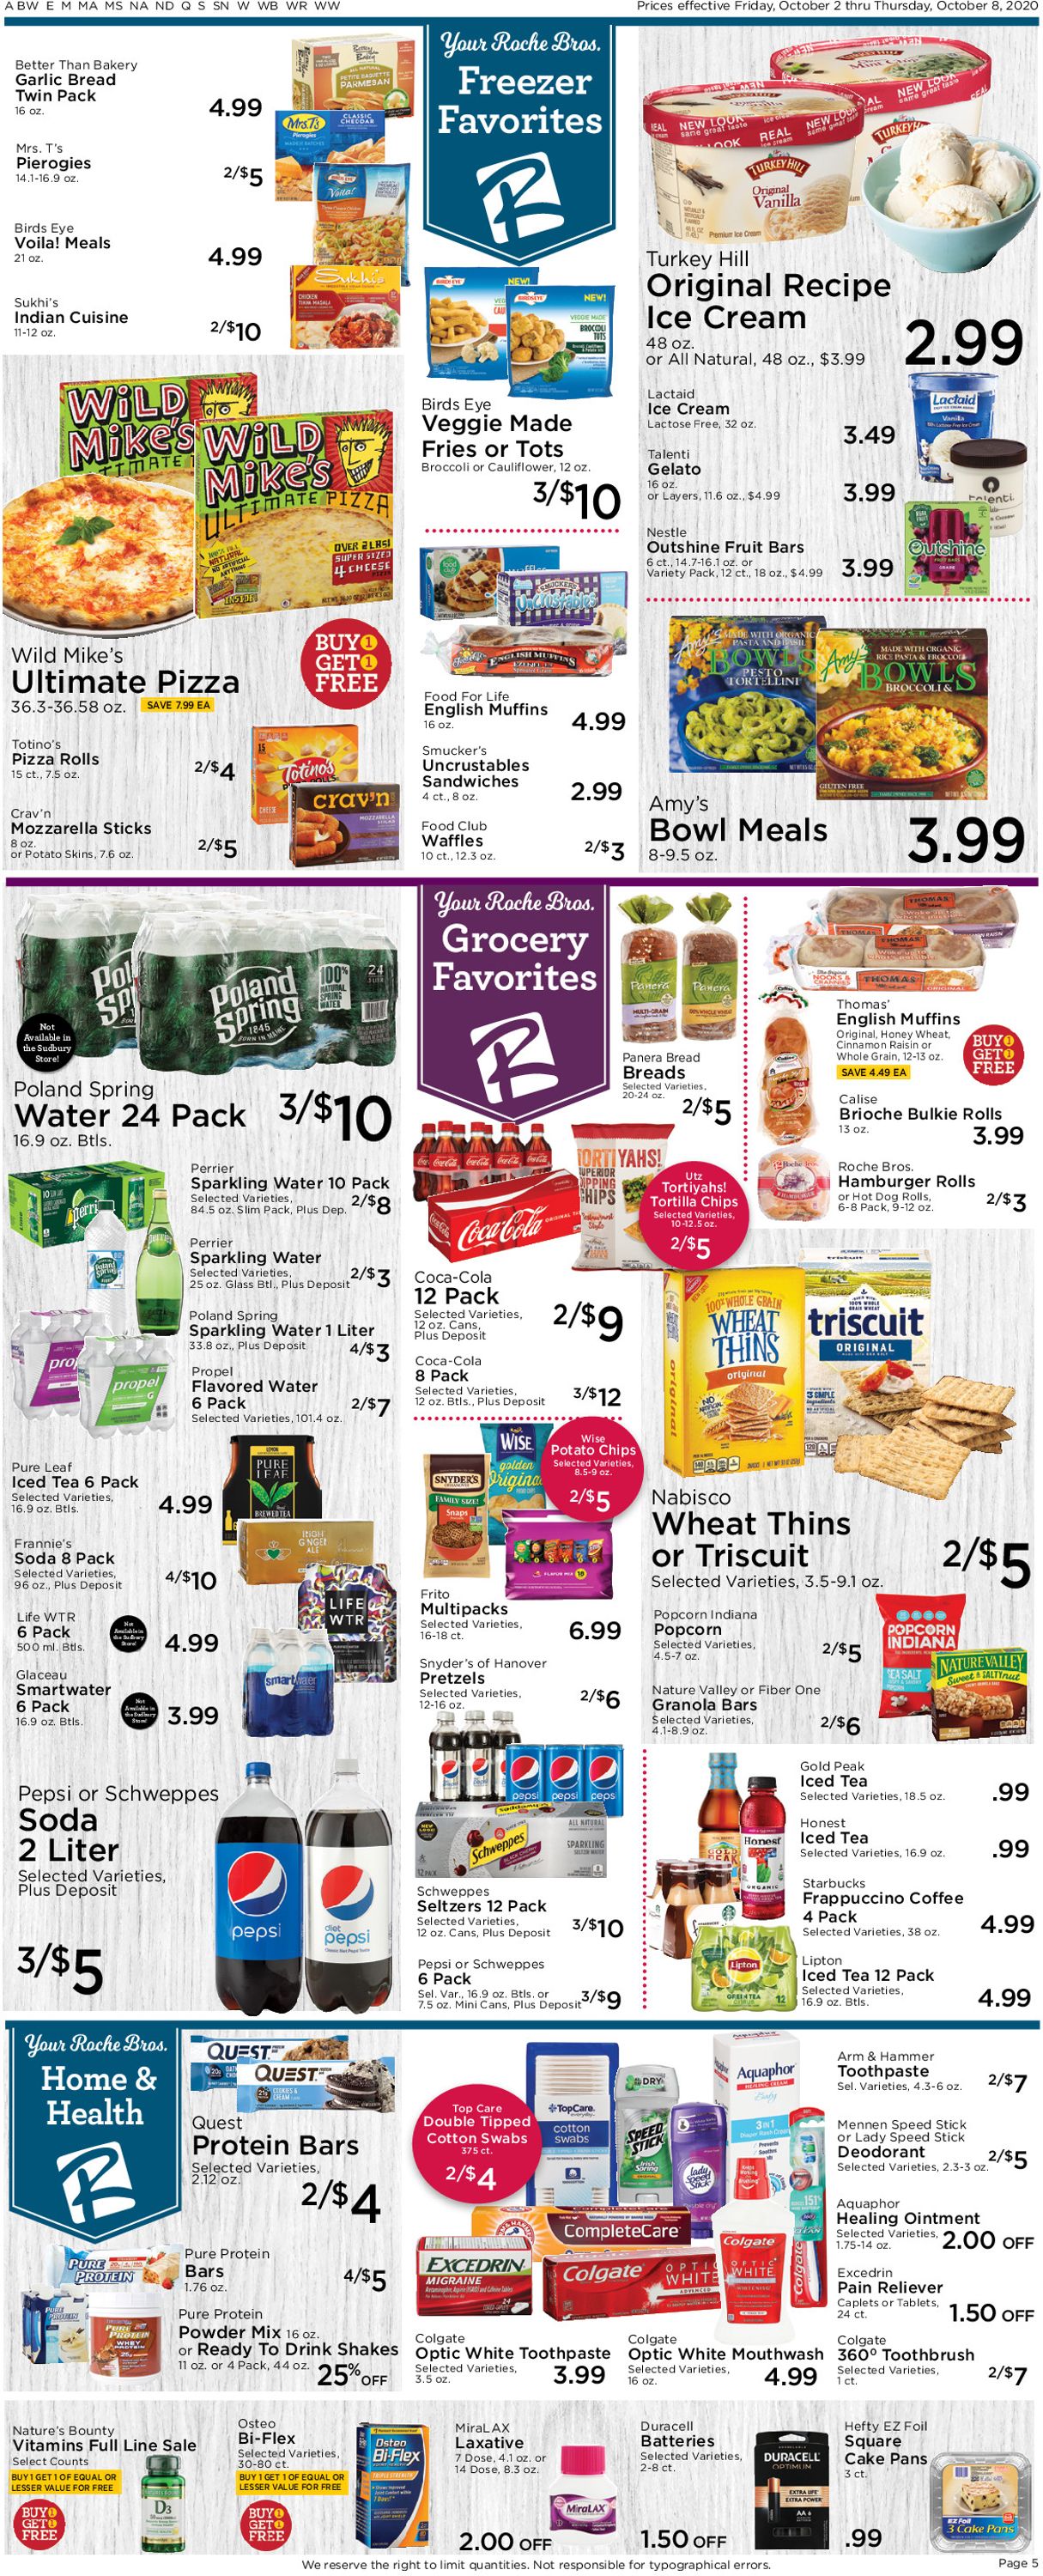 Roche Bros. Supermarkets Ad from 10/02/2020